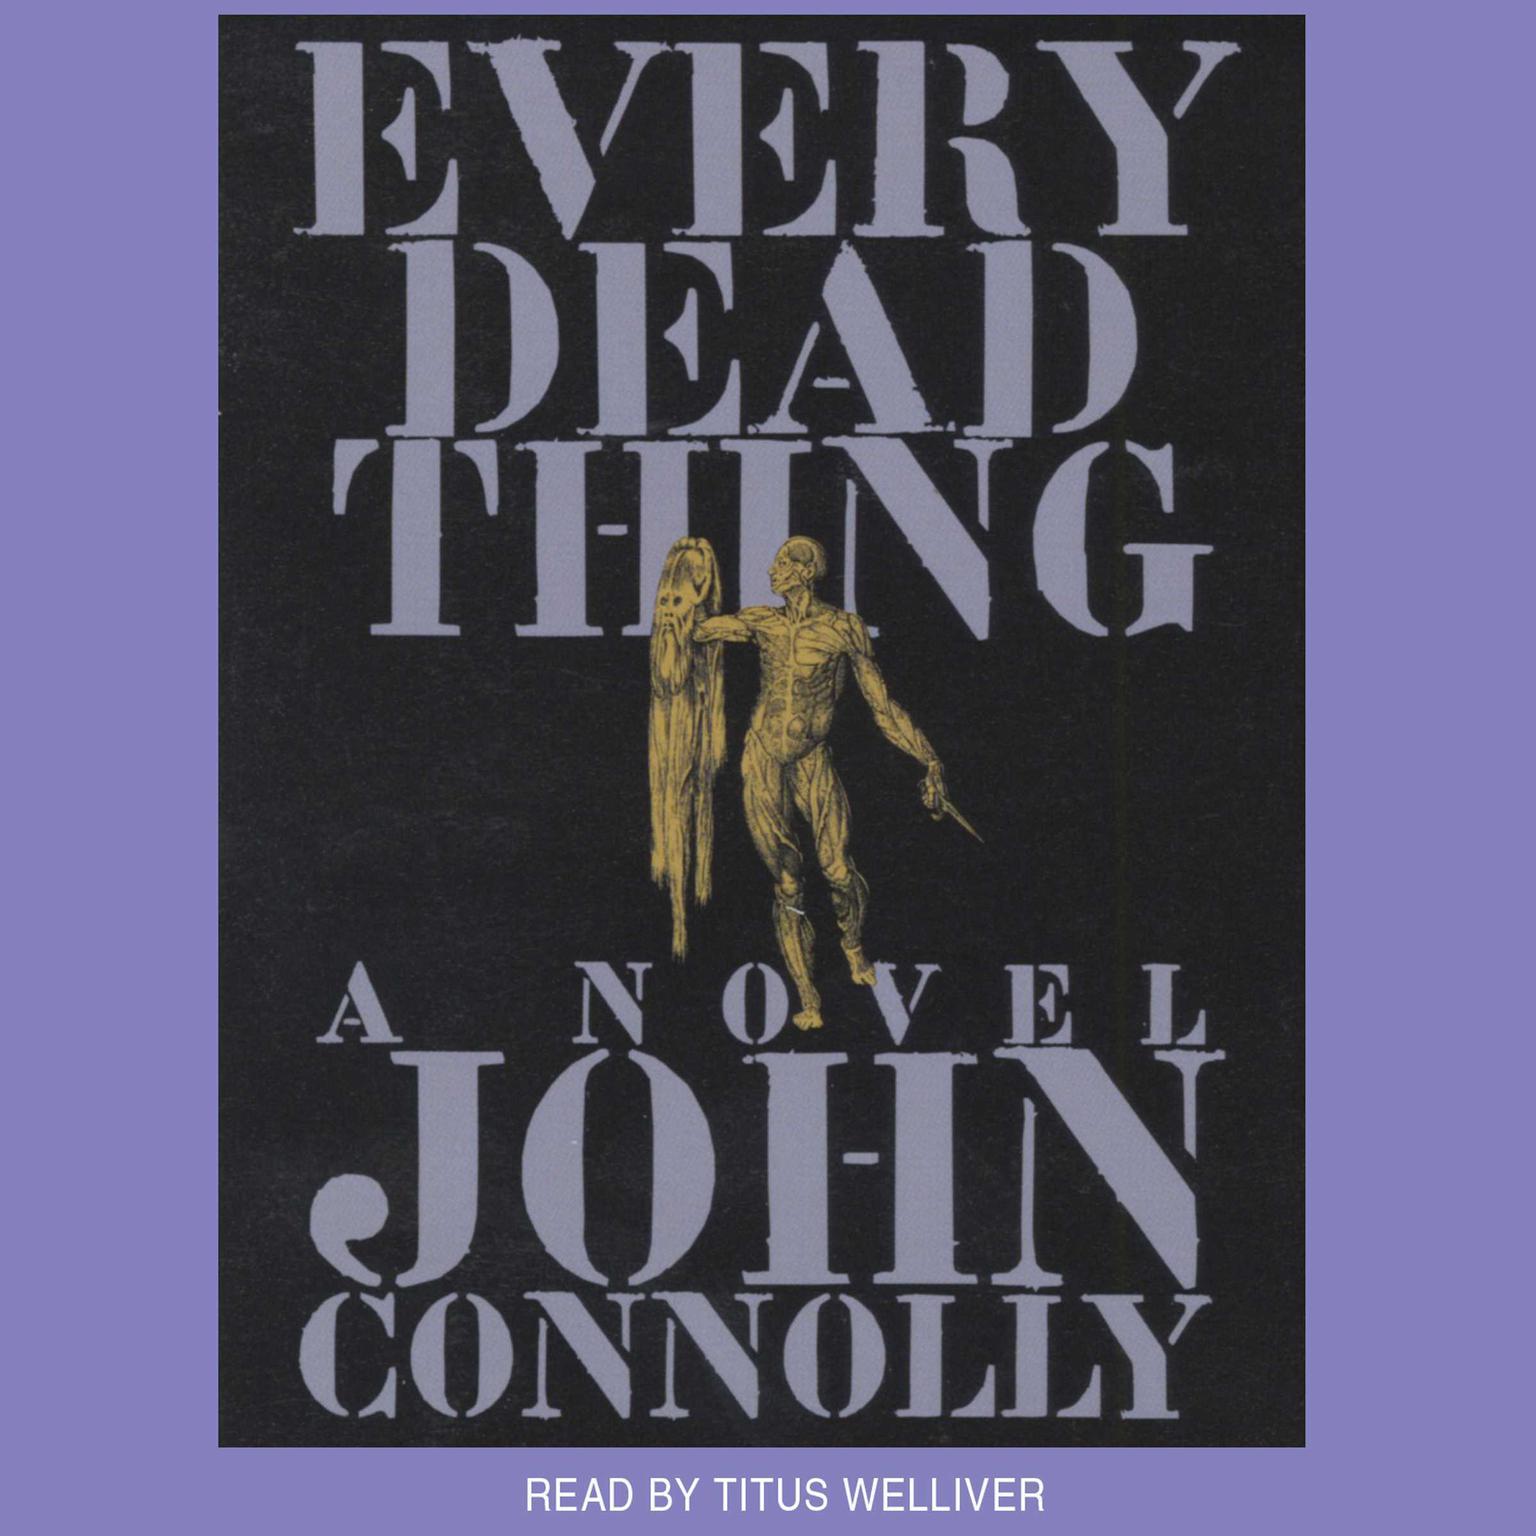 Every Dead Thing (Abridged) Audiobook, by John Connolly